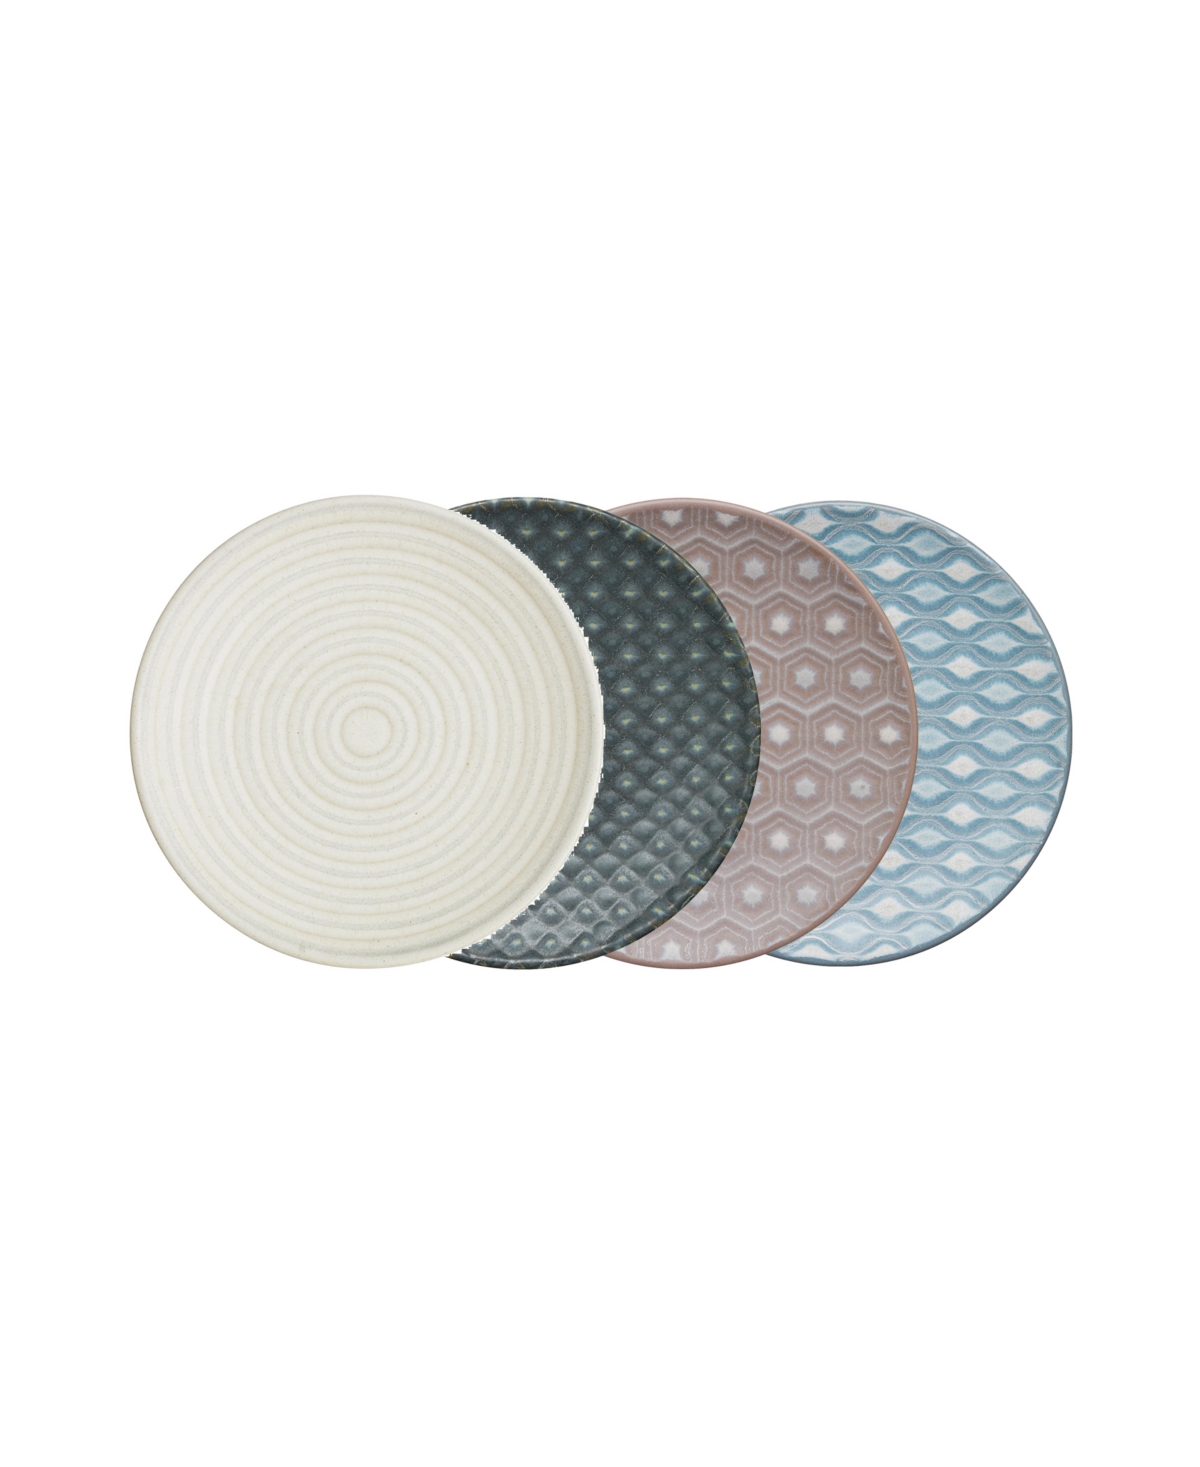 Impression Assorted Accent Plates, Set of 4 - Multi